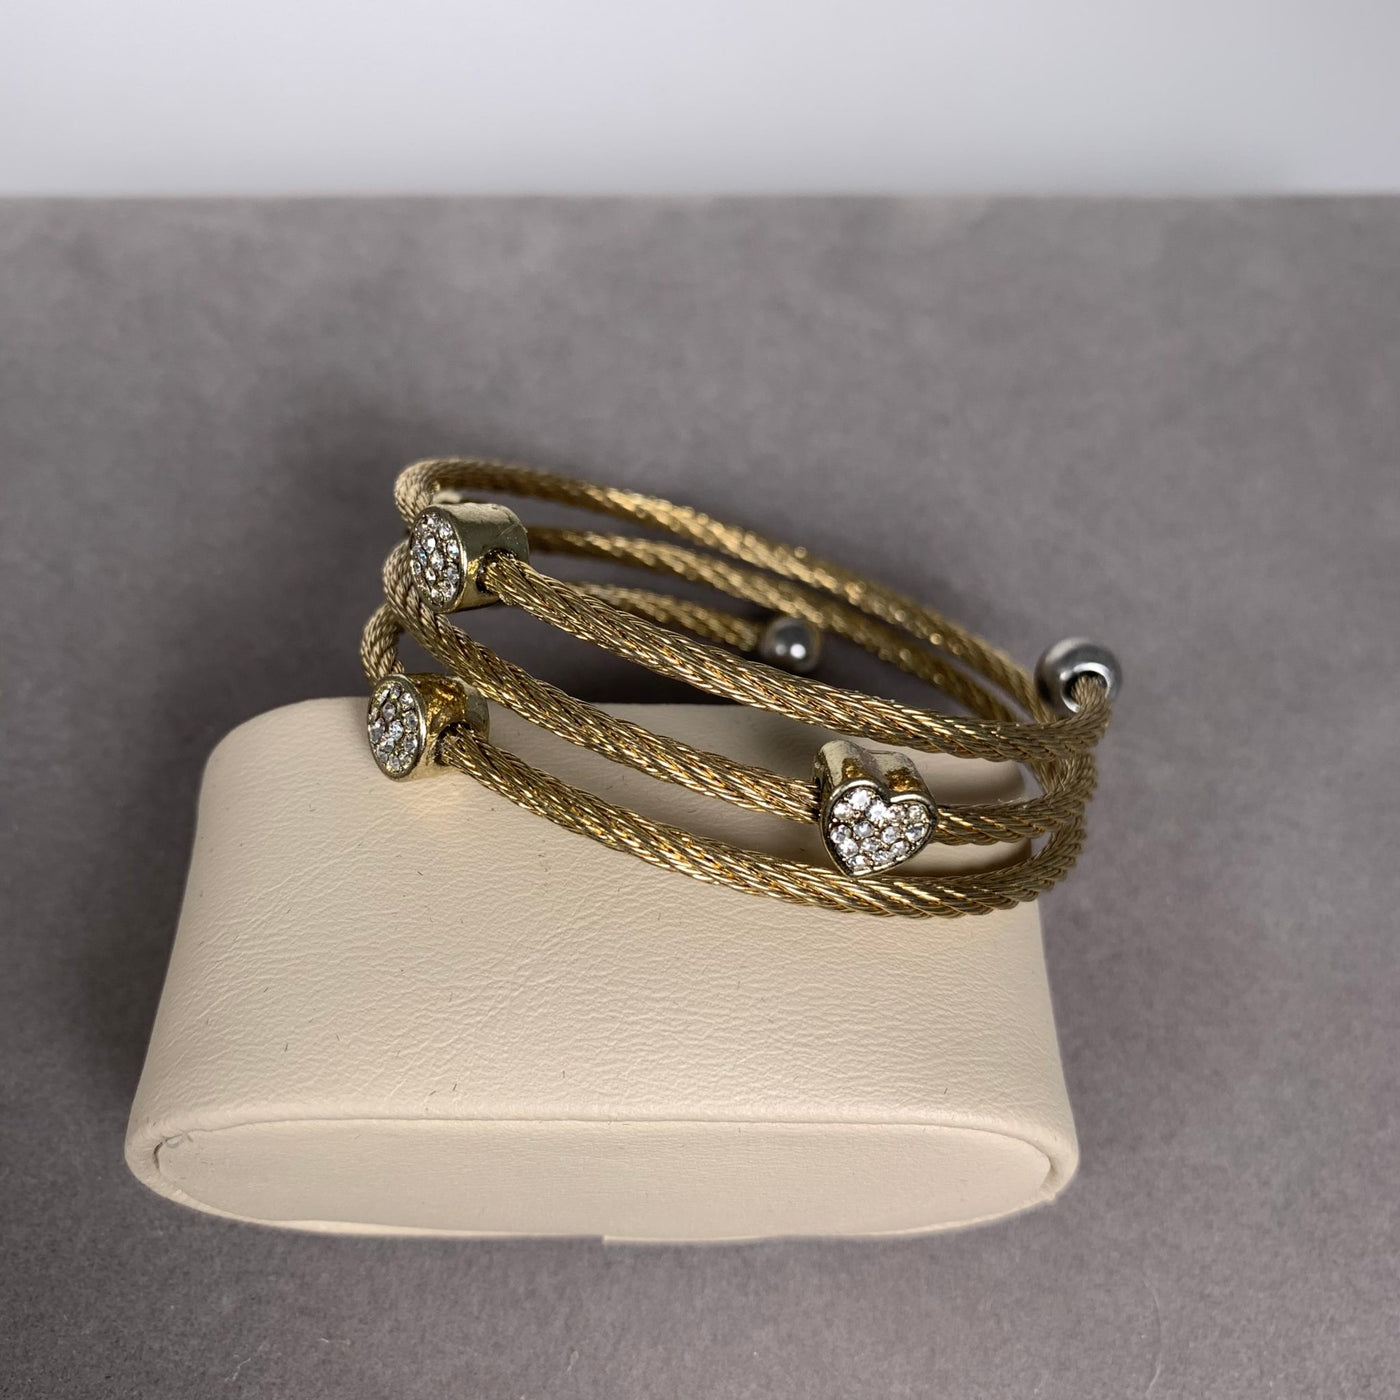 Gold Tone Spiral Wire Bangle Bracelet with Clear Crystal Motifs